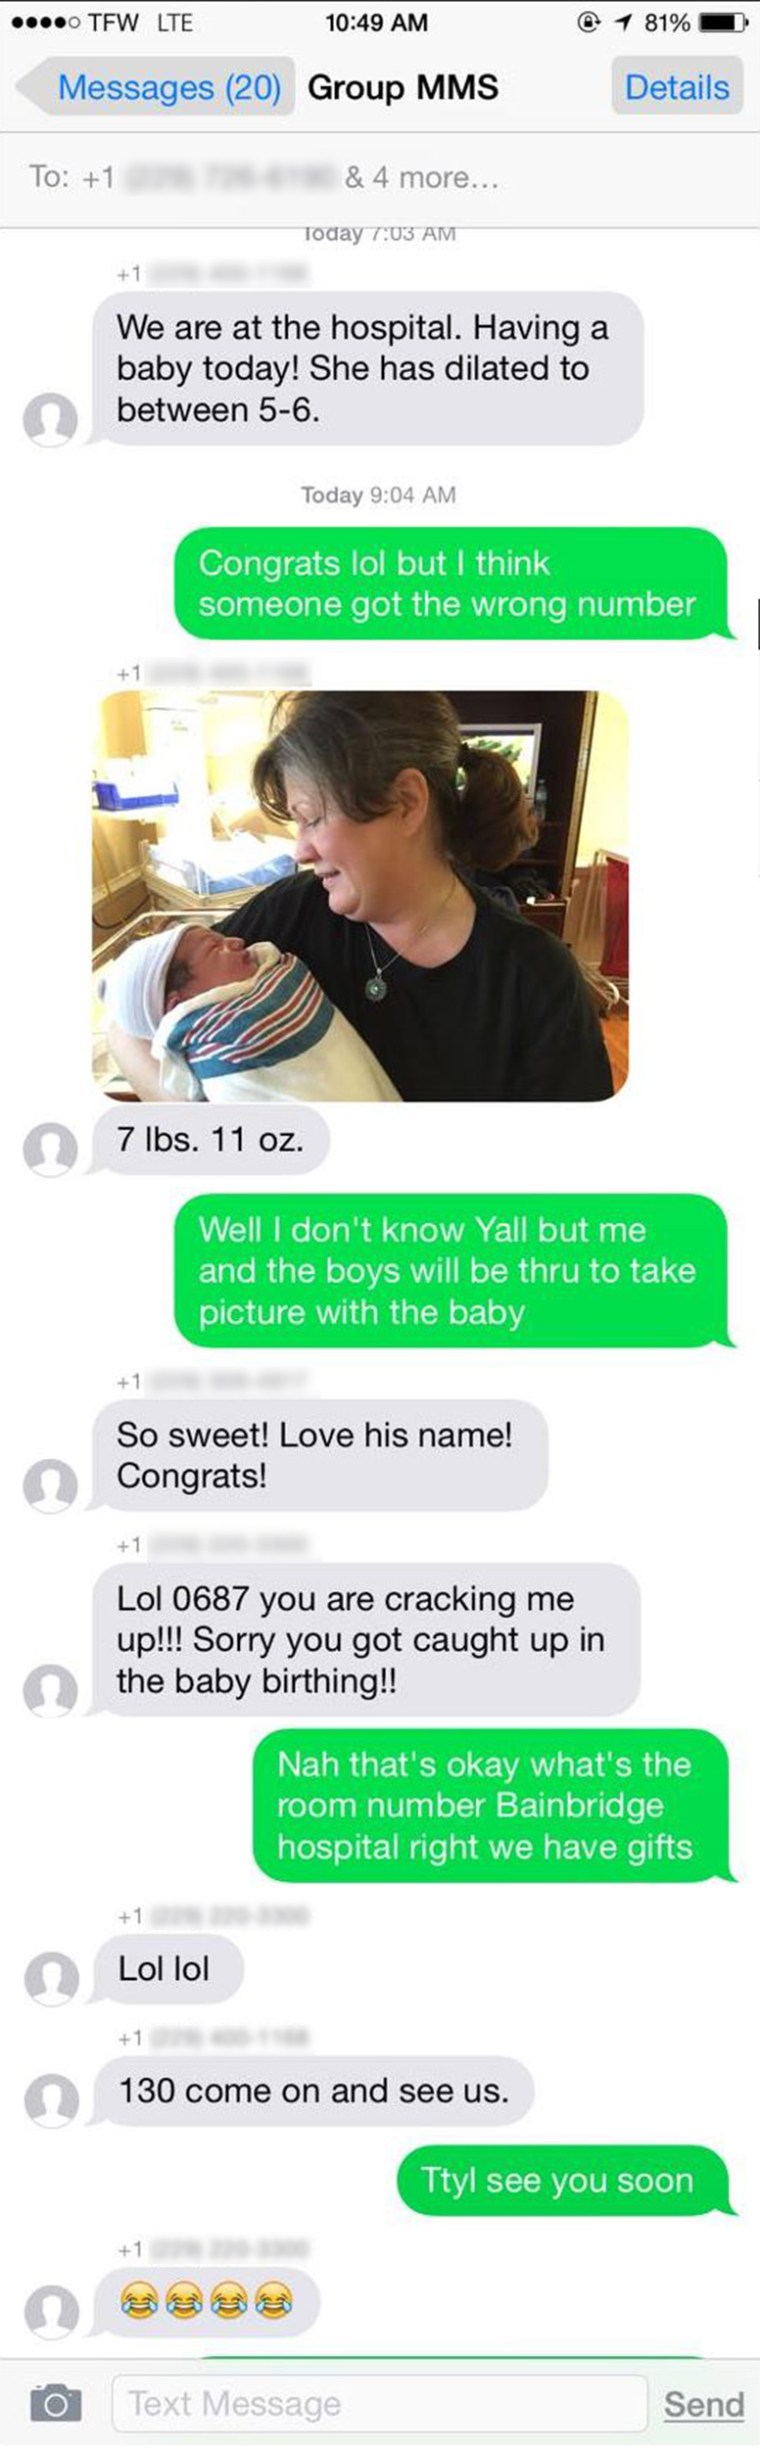 Texting mistake over baby's birth results in strangers visiting them at the hospital